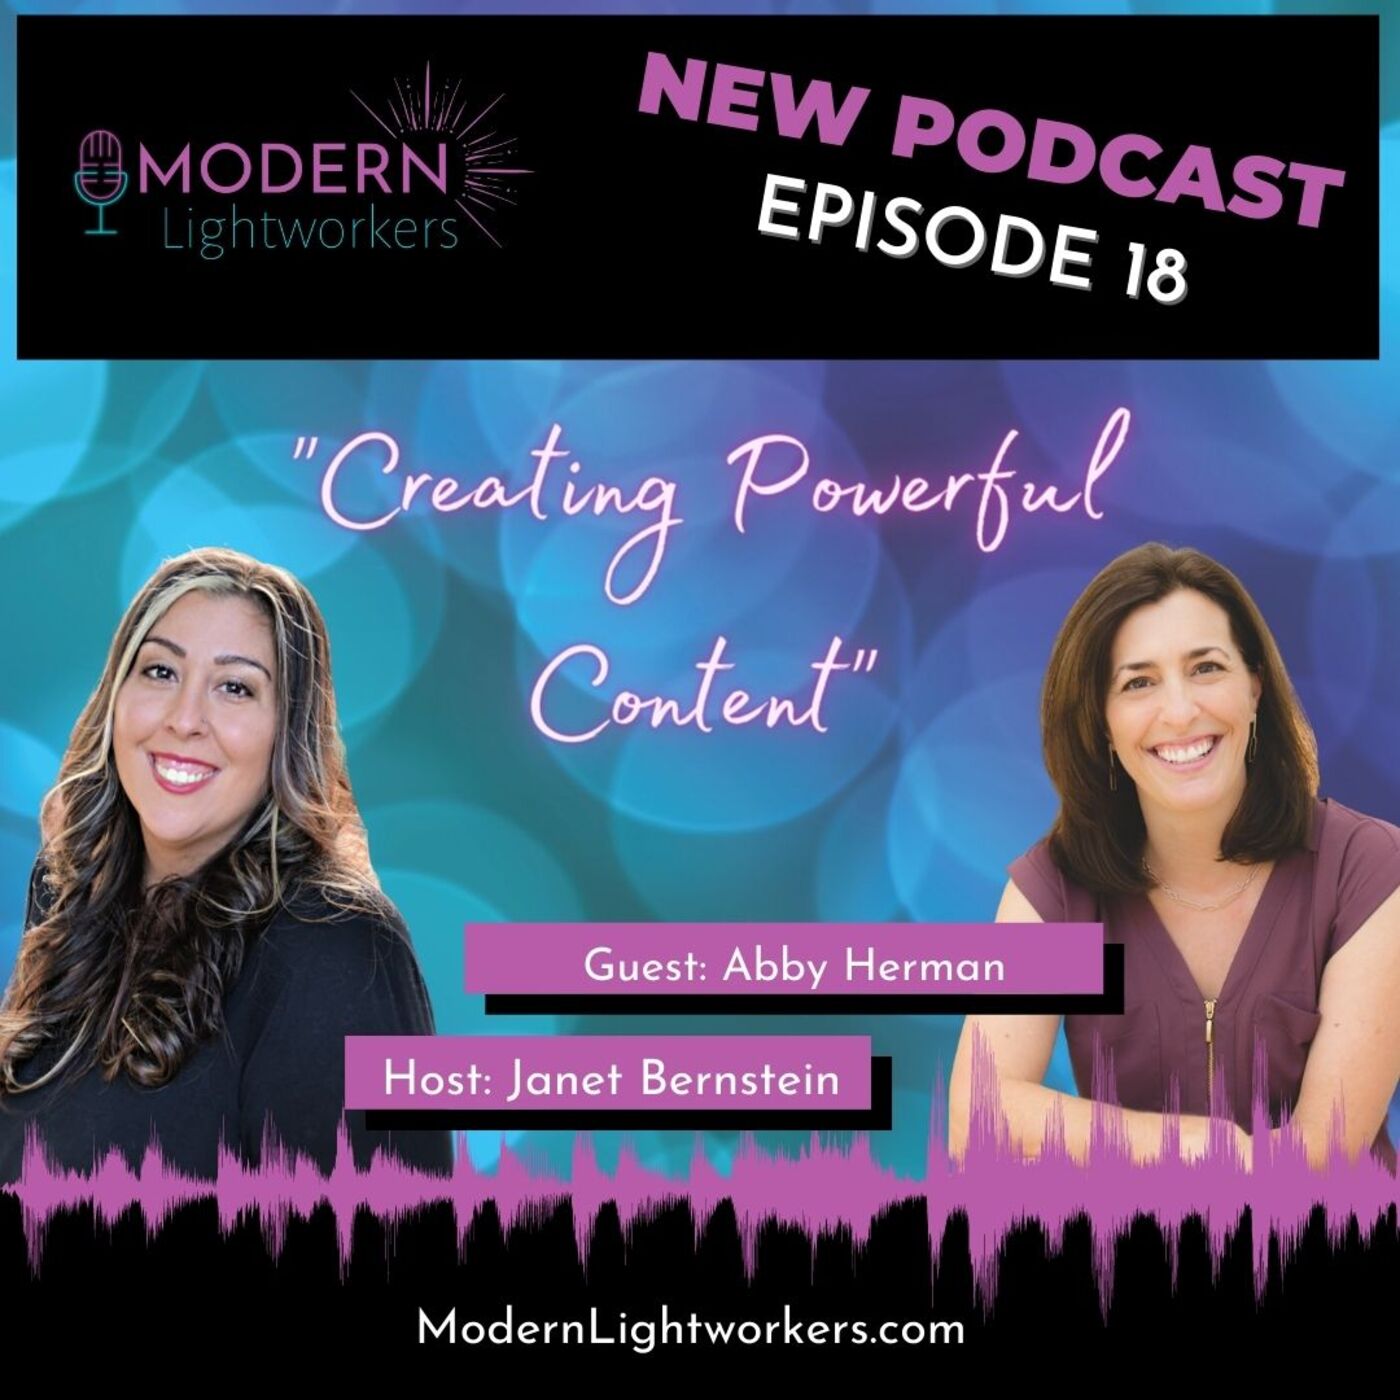 Modern Lightworkers Episode 18: Creating Powerful Content